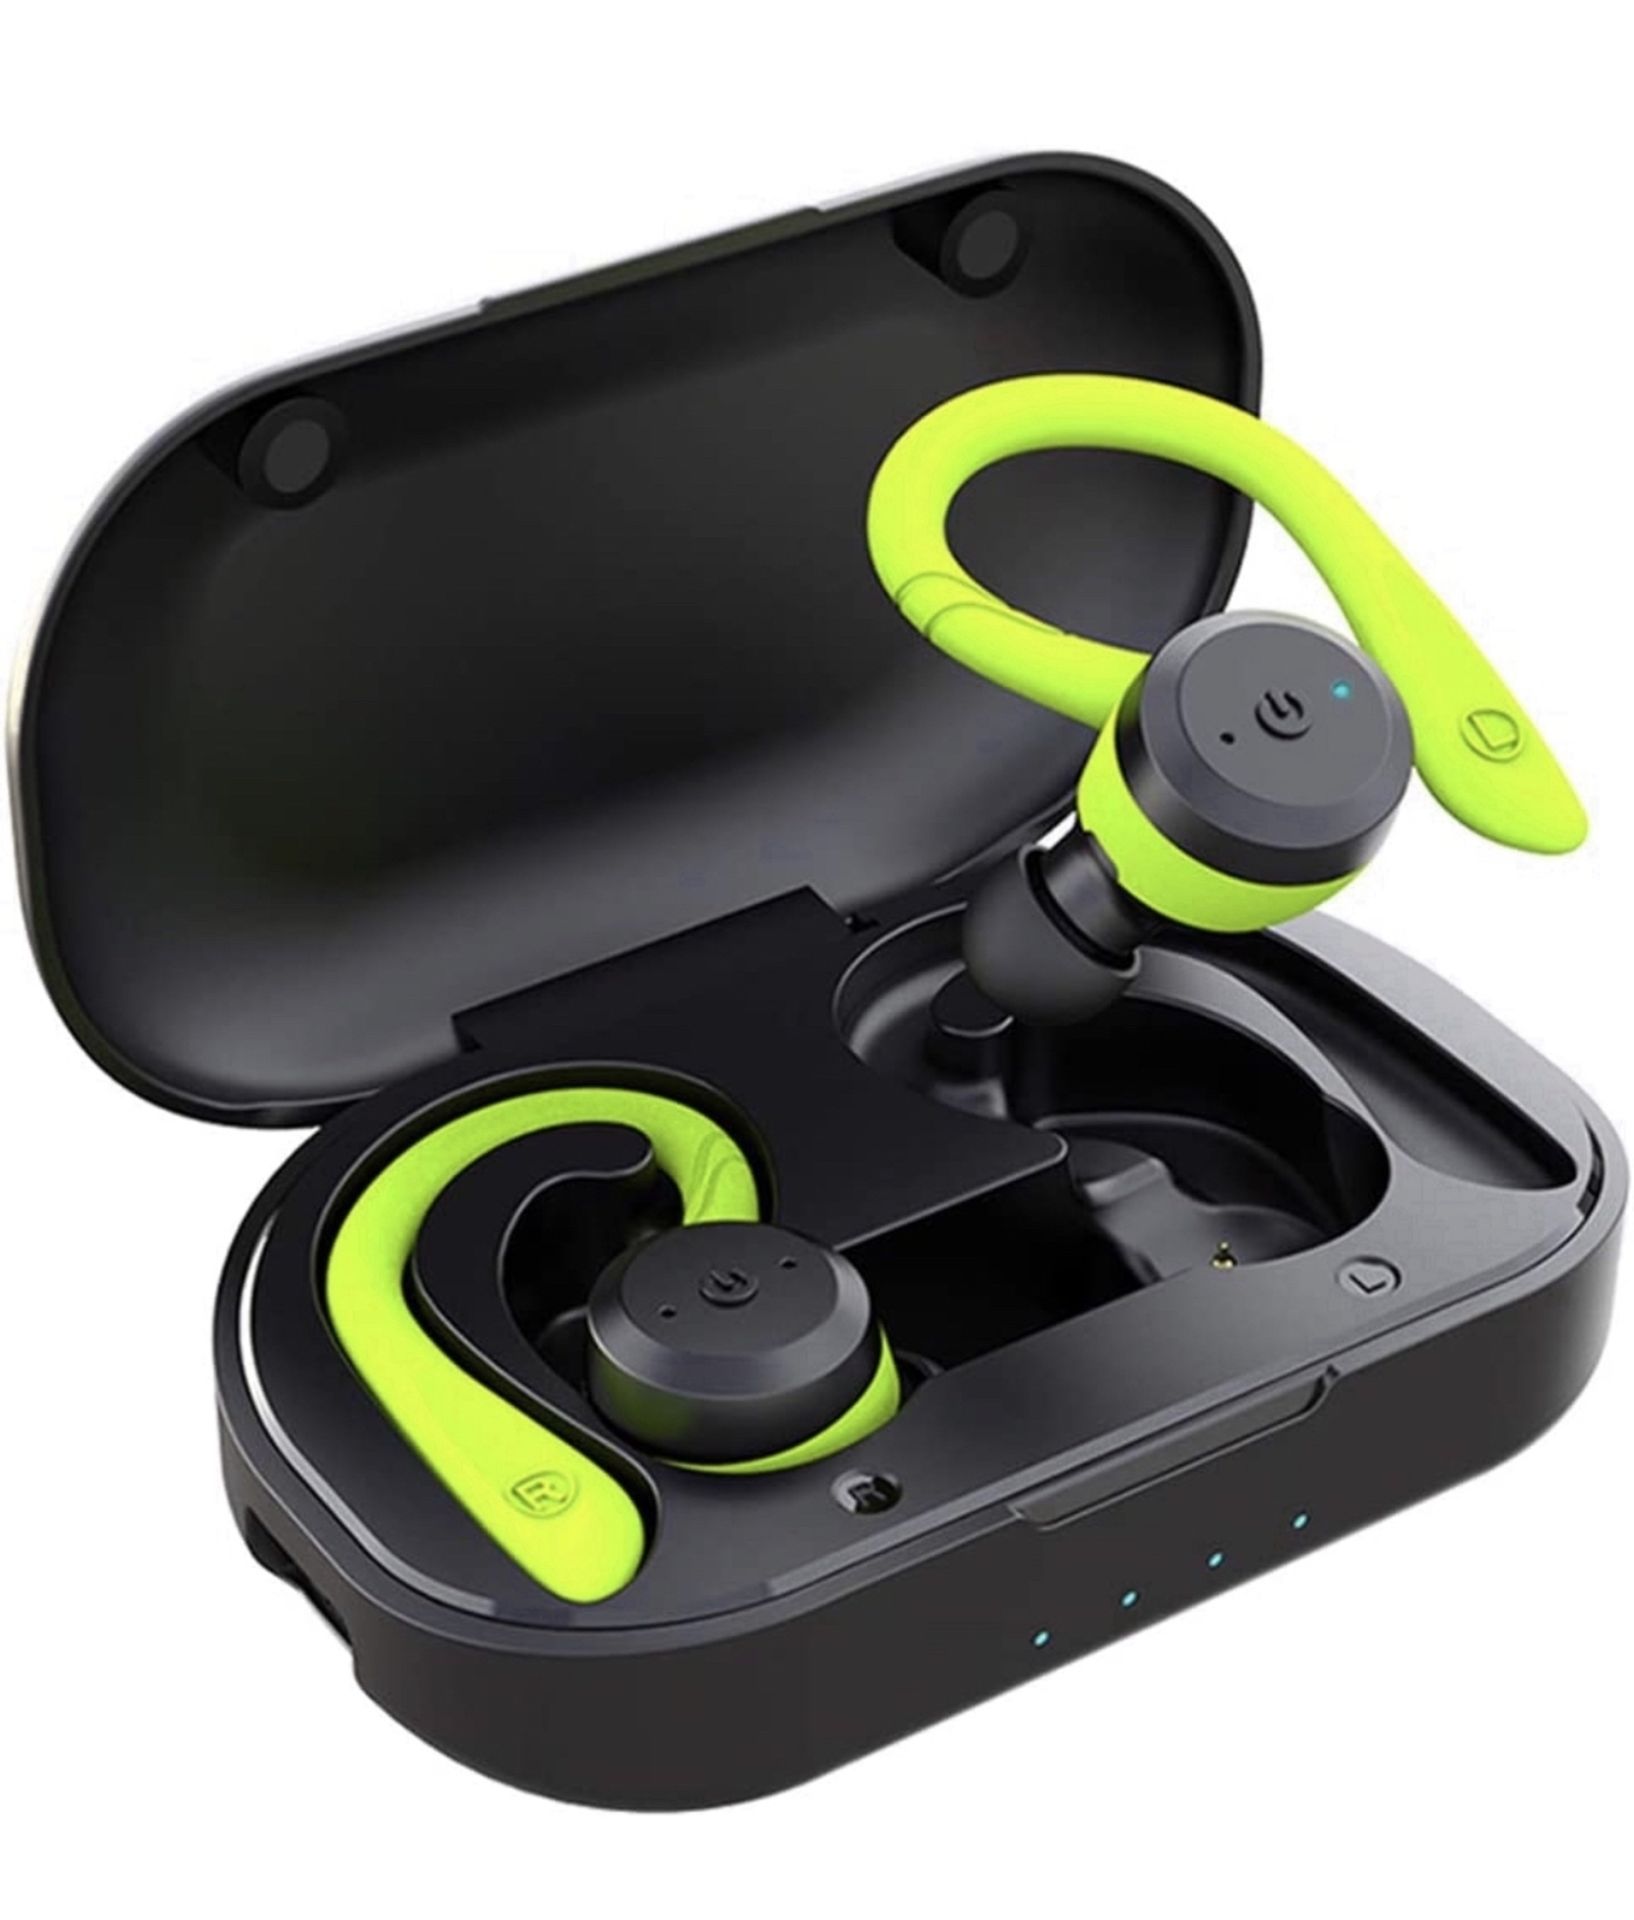 RRP £25.99 Apekx True Wireless Earbuds with Charging Case Premium Sound Built-In Mic